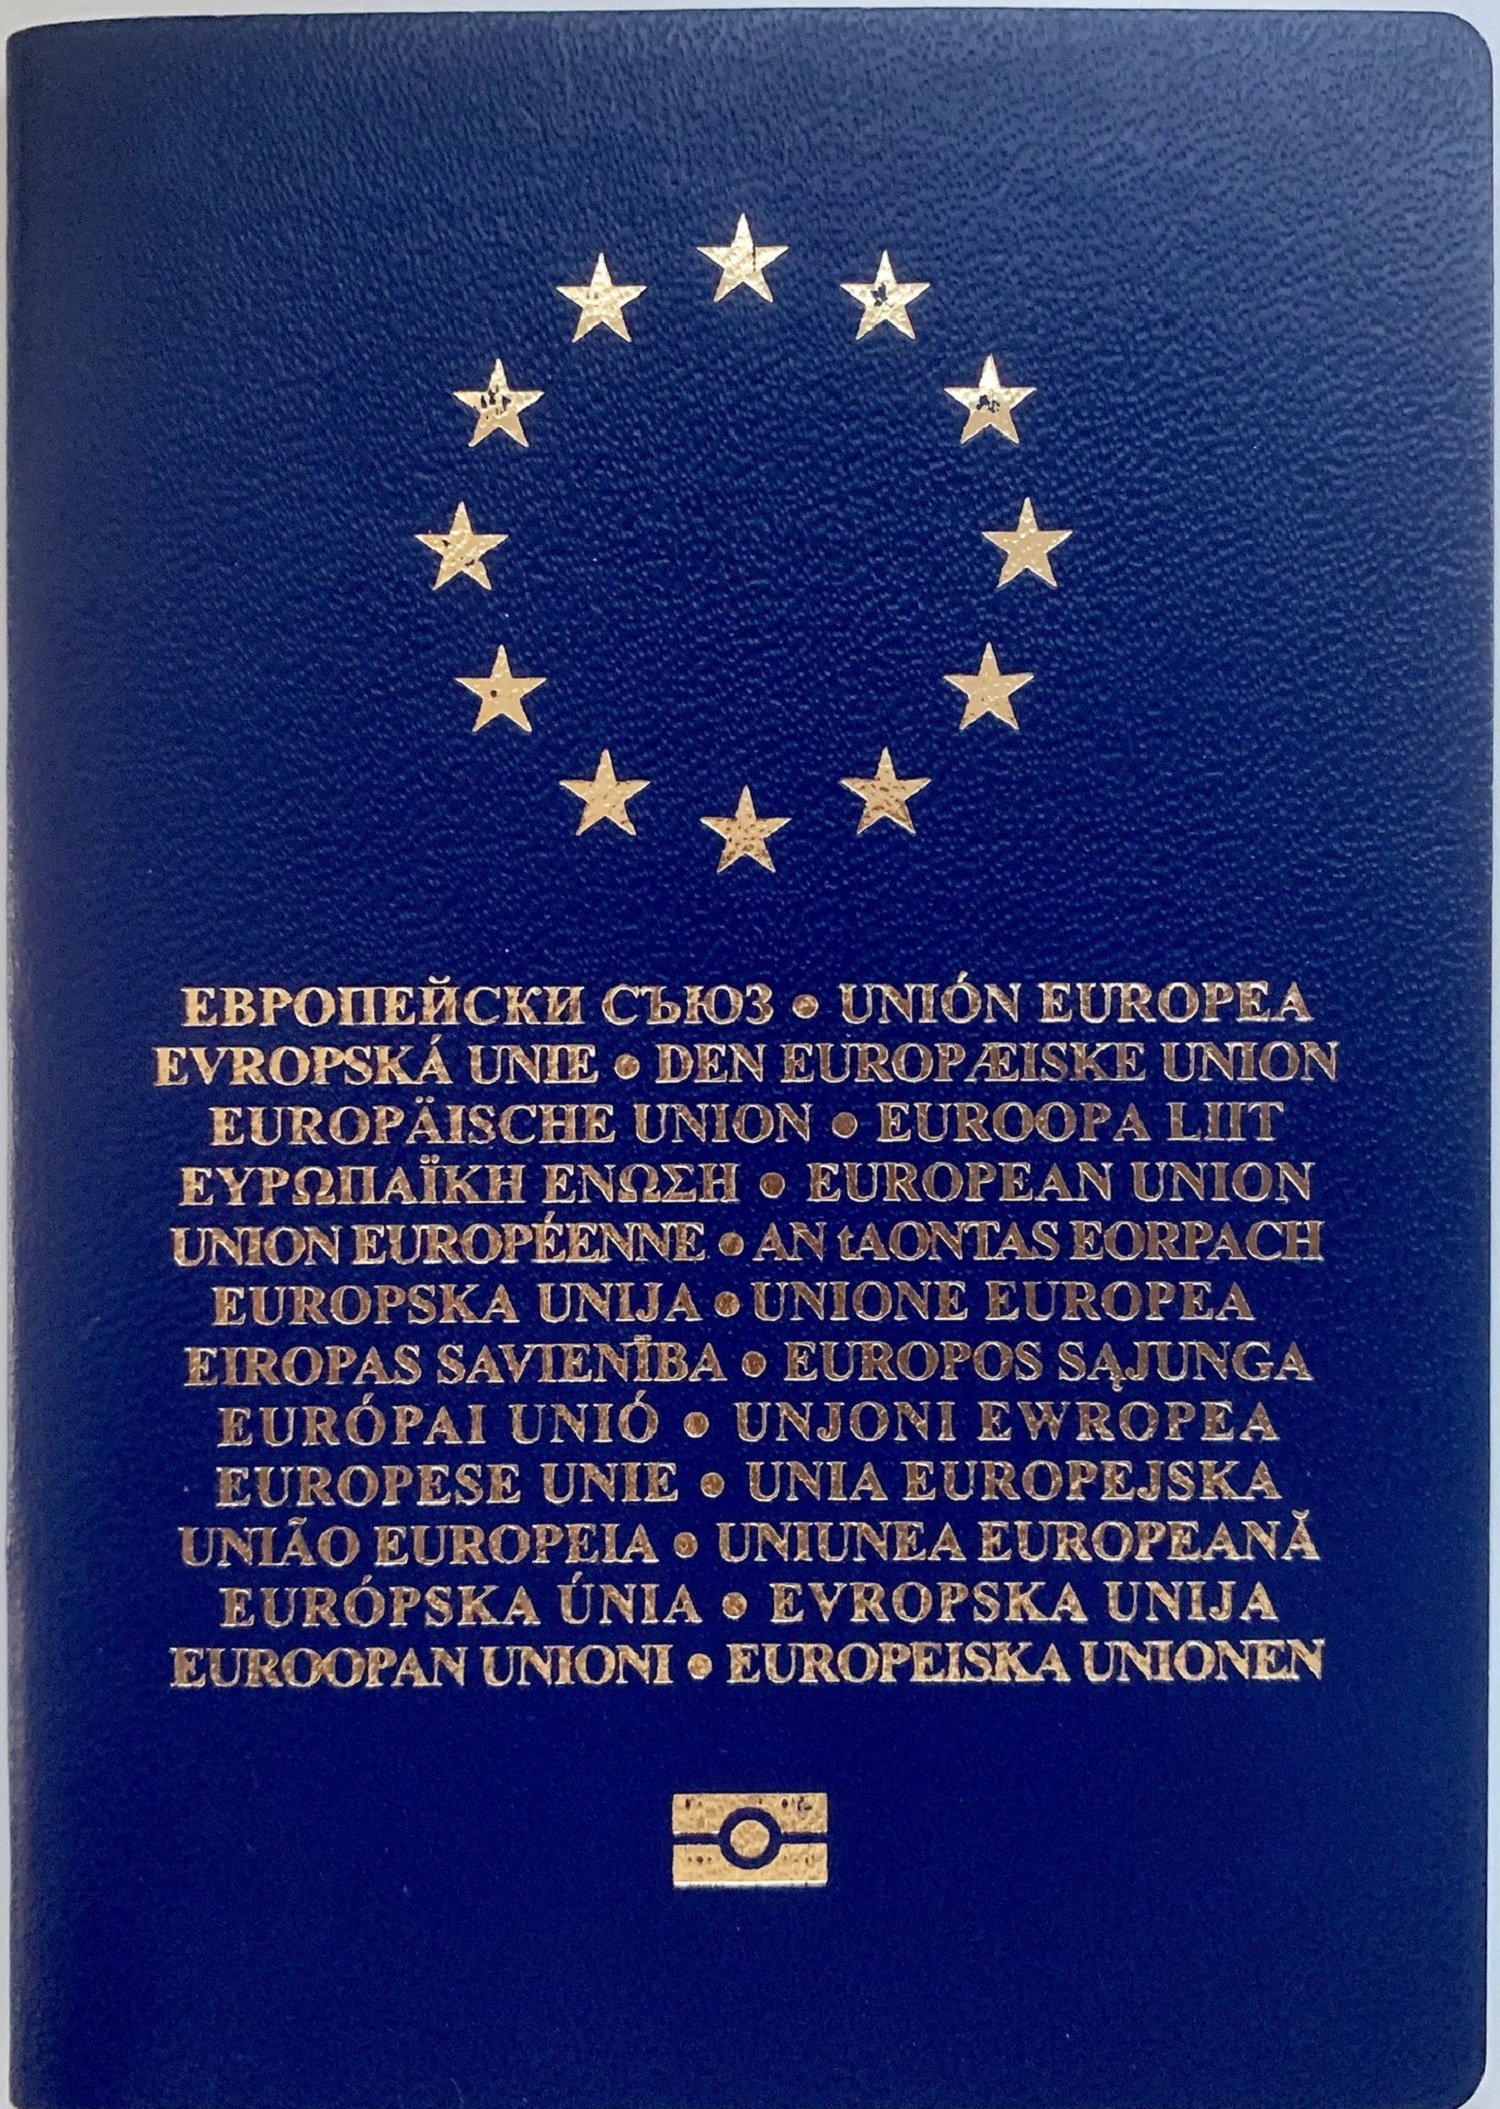 This is the new European passport which Carles Puigdemont will receive